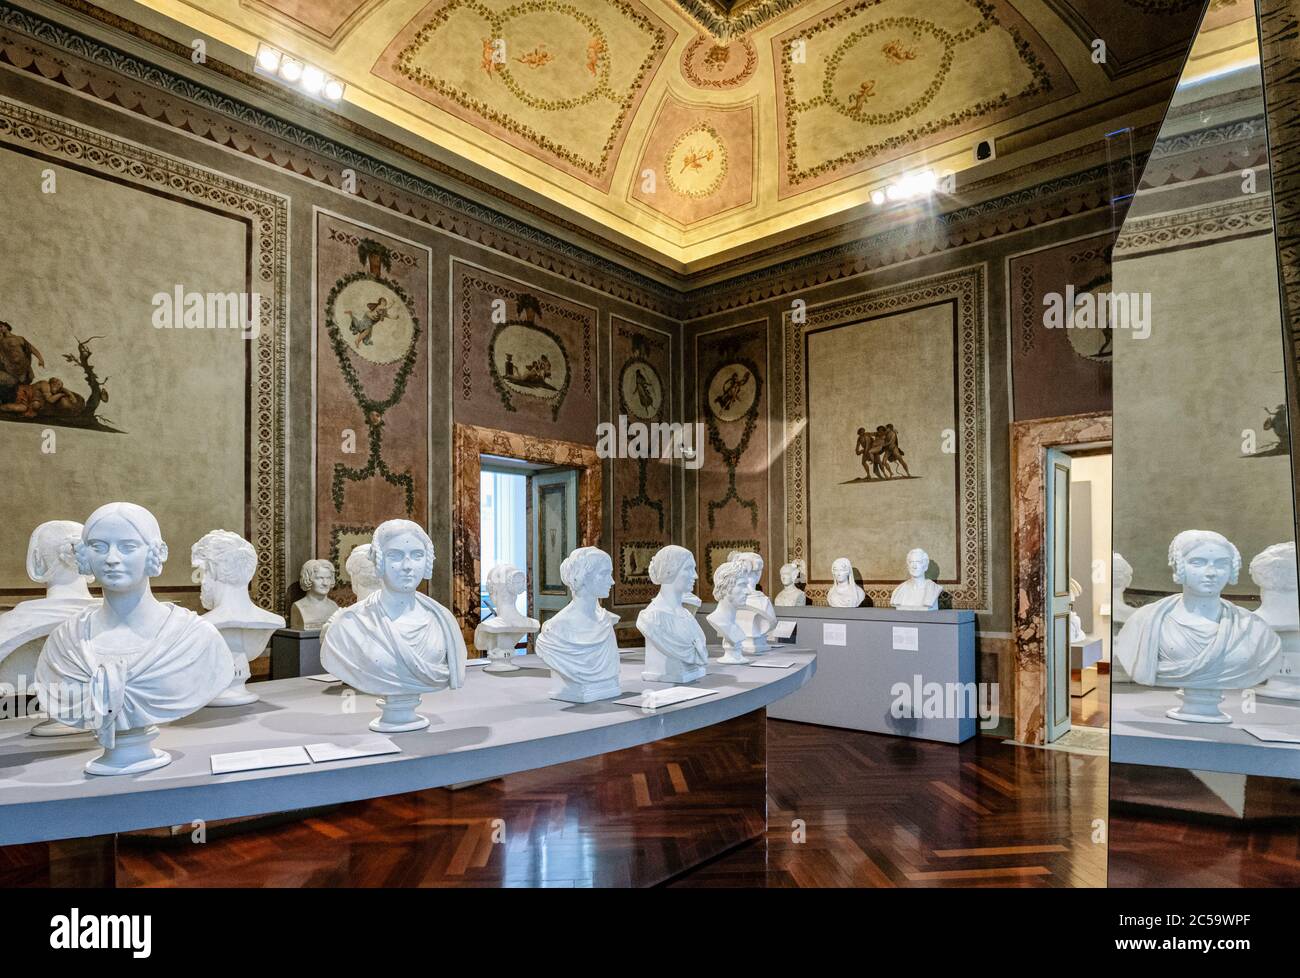 Italy lazio Gallery of busts of personalities of the time carved in plaster by Pietro Tenerani, in the 2th floor of Palazzo Braschi in Rome Stock Photo